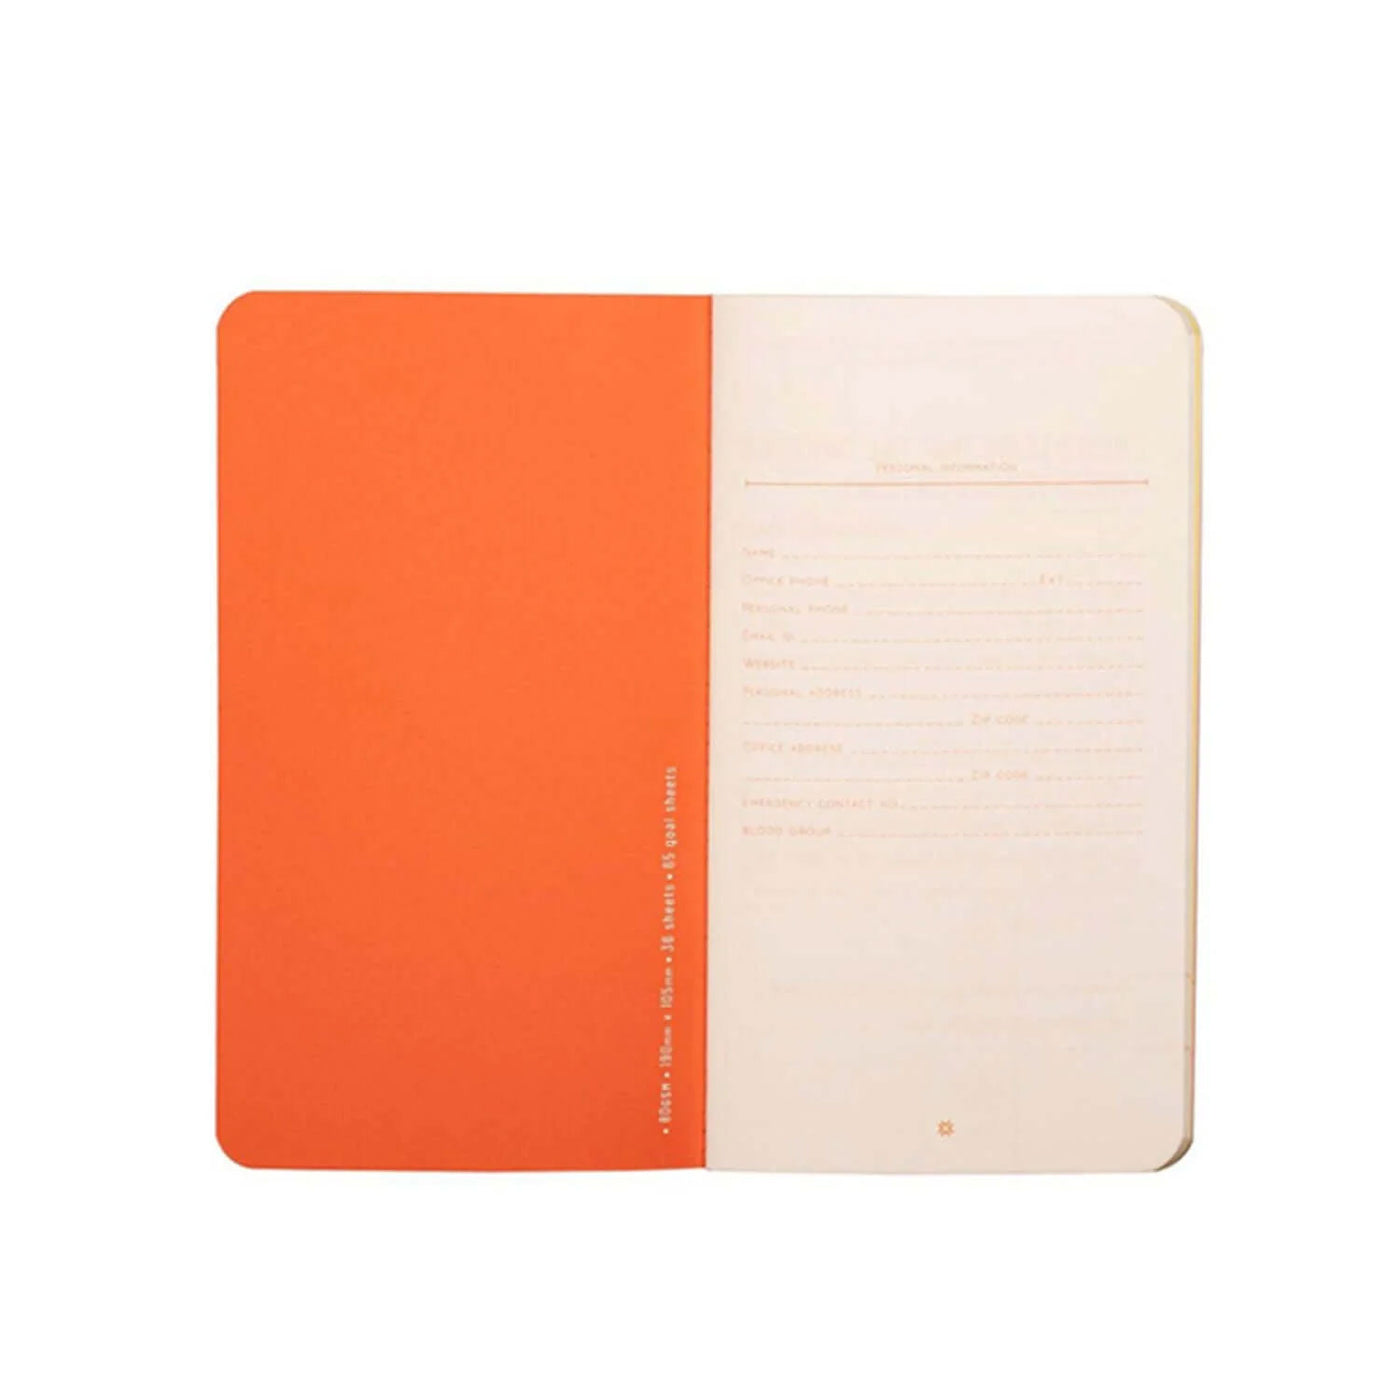 Pennline Quikfill Notebook Refill For Quikrite, Orange - Set Of 2 3